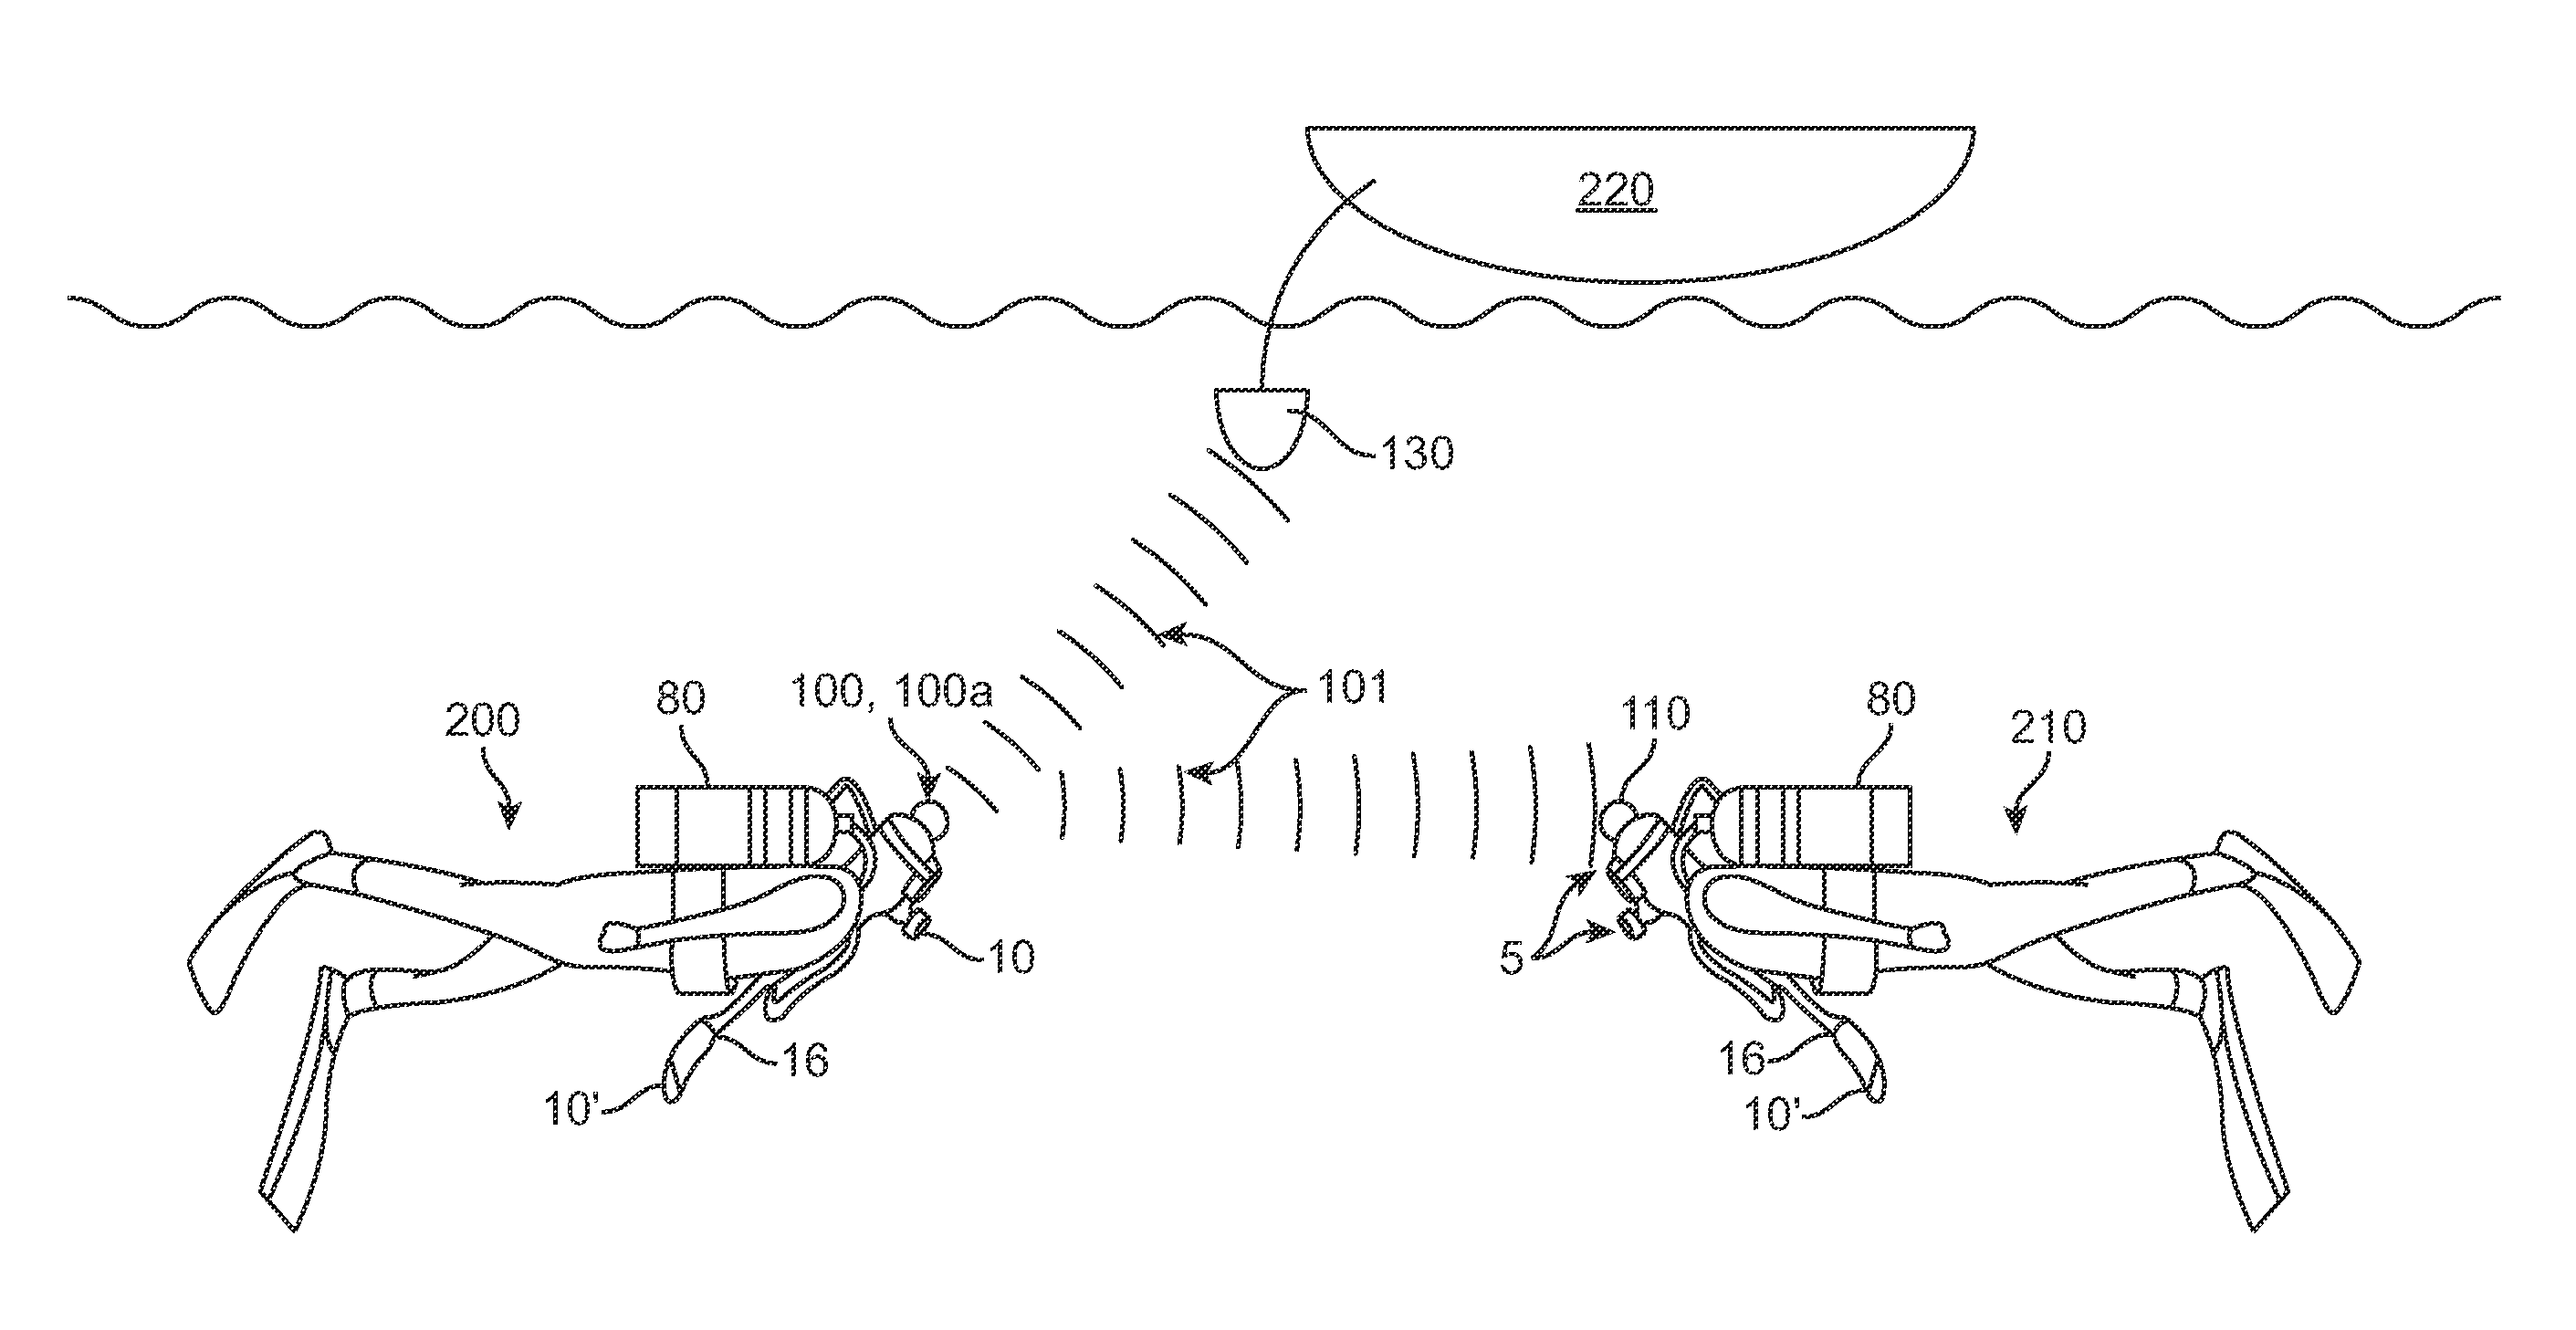 Mouthpiece for measurement of biometric data of a diver and underwater communication